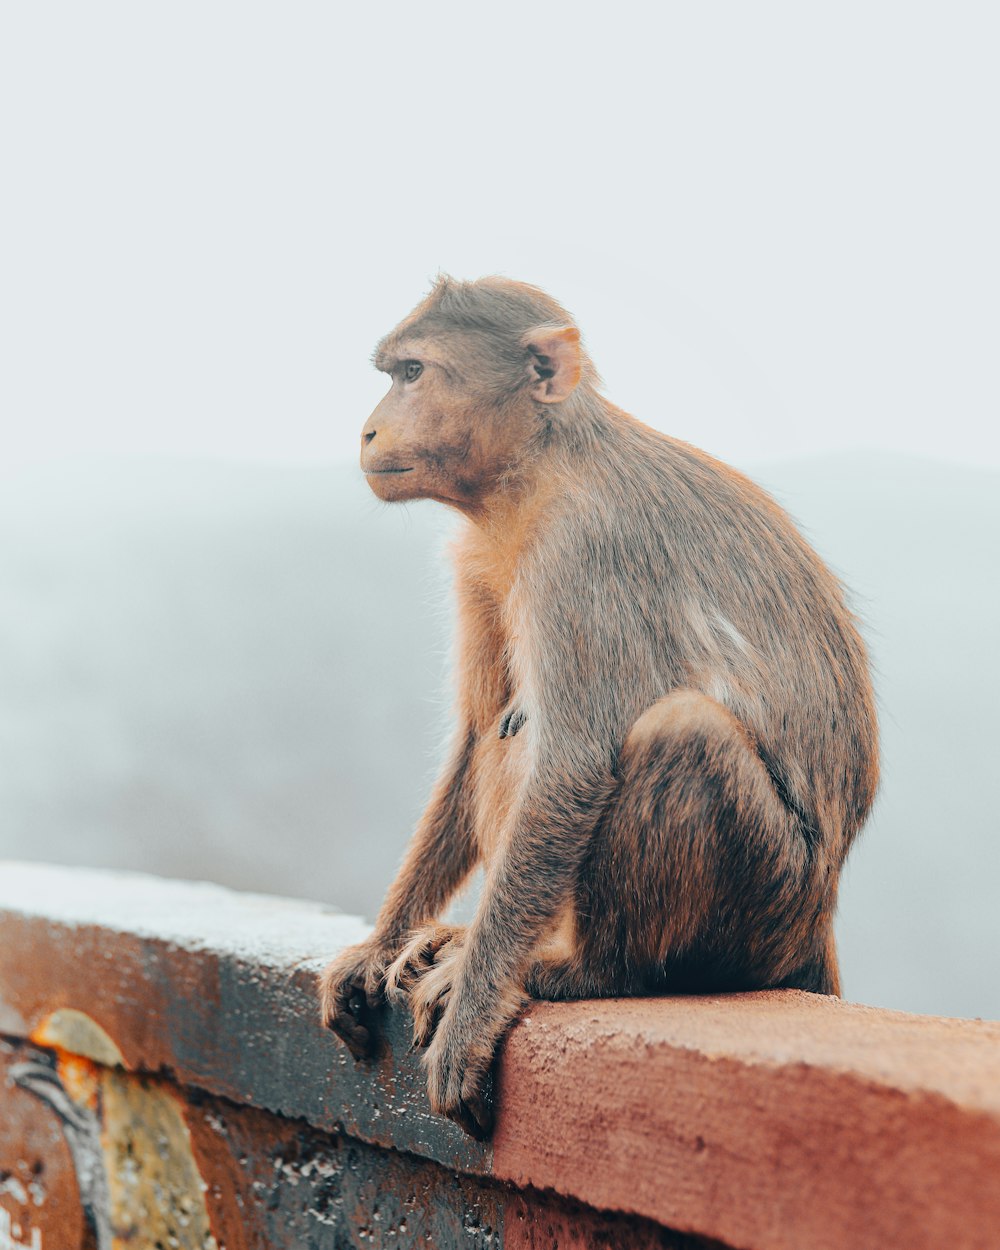 a monkey sitting on top of a brick wall